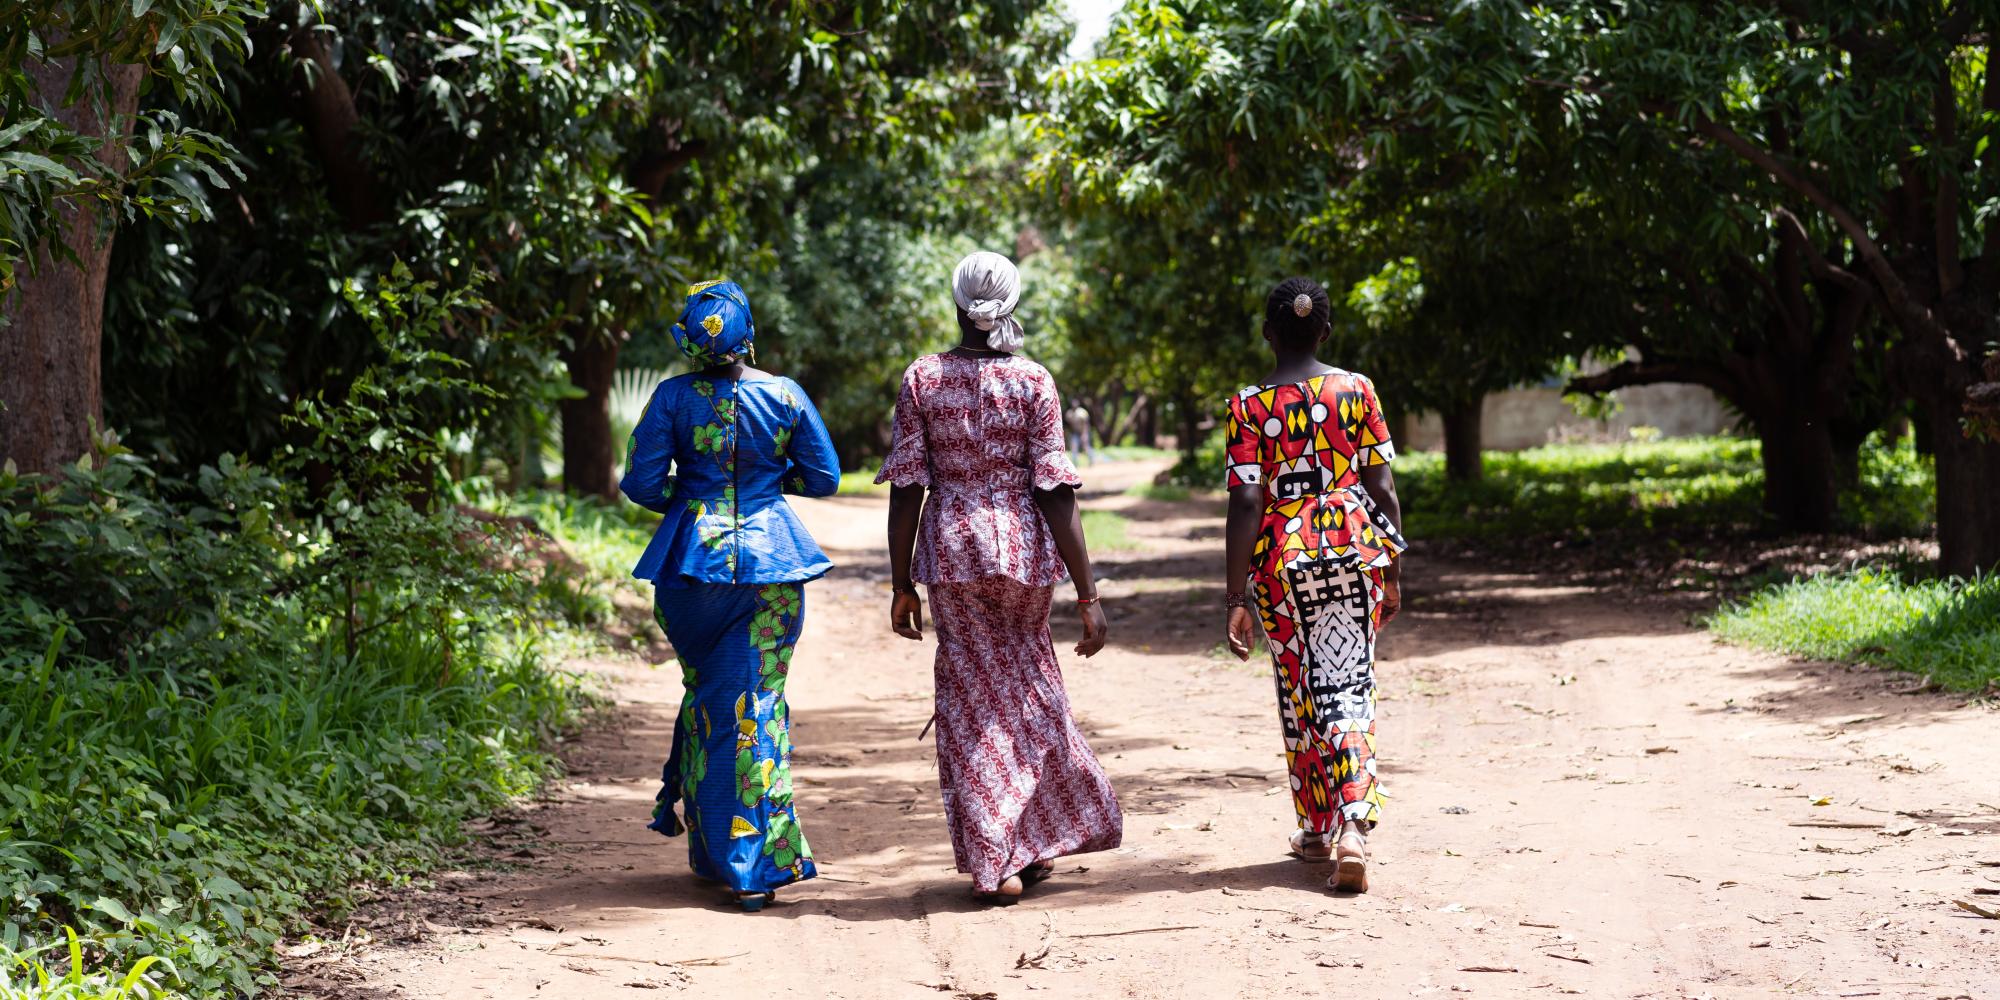 Three women in traditional African dress walk away from camera, down long road, leafy green trees around them